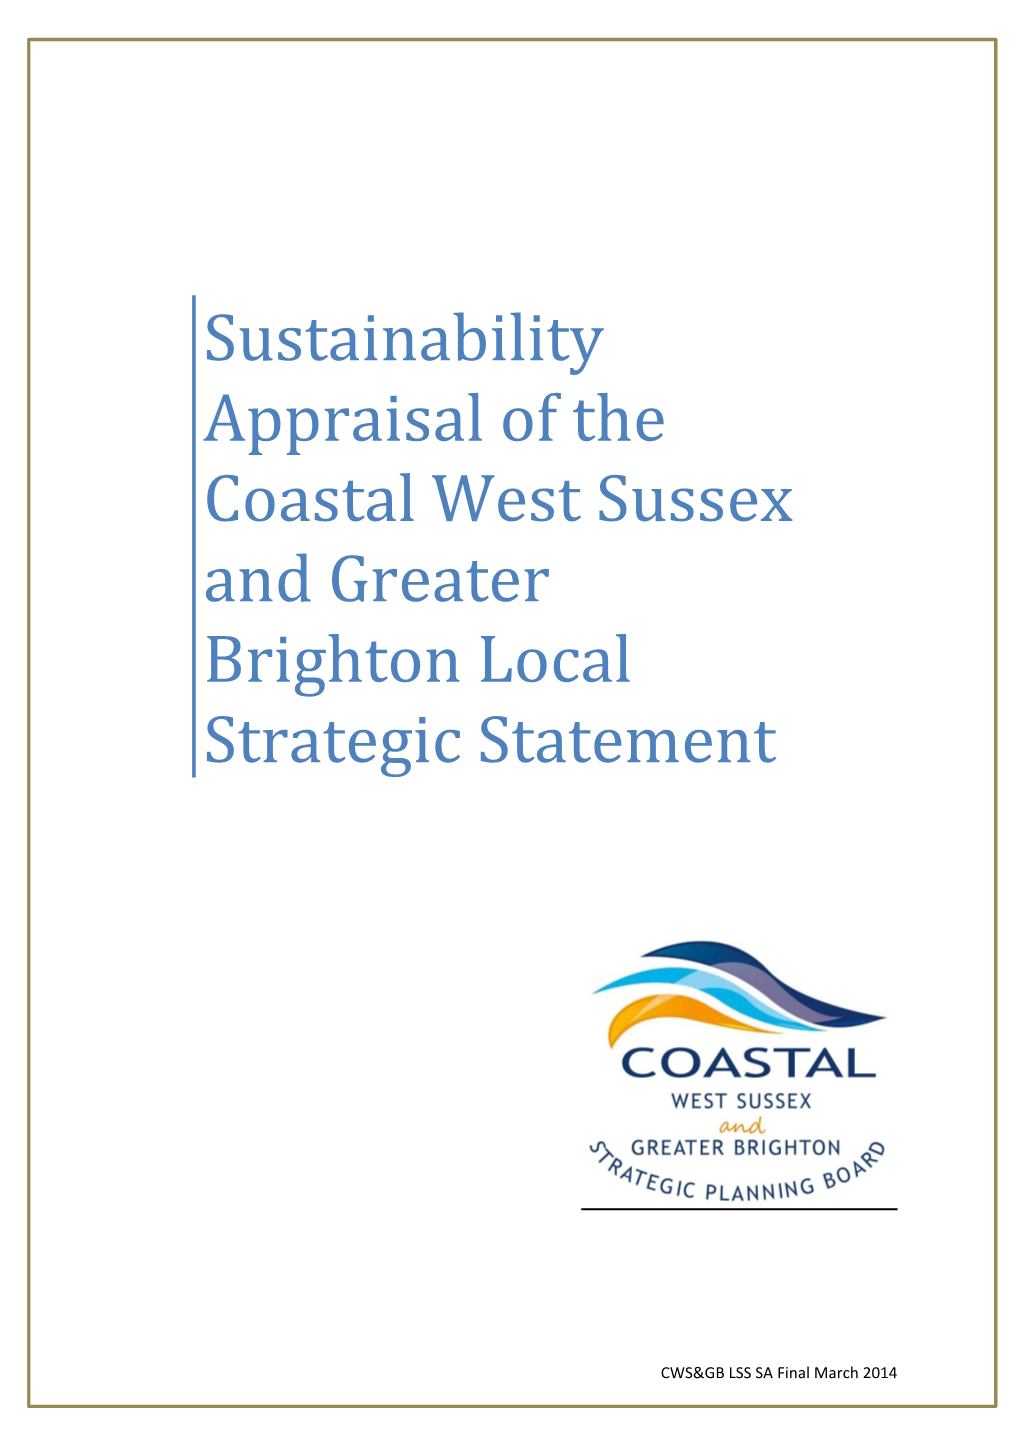 Sustainability Appraisal of the Coastal West Sussex and Greater Brighton